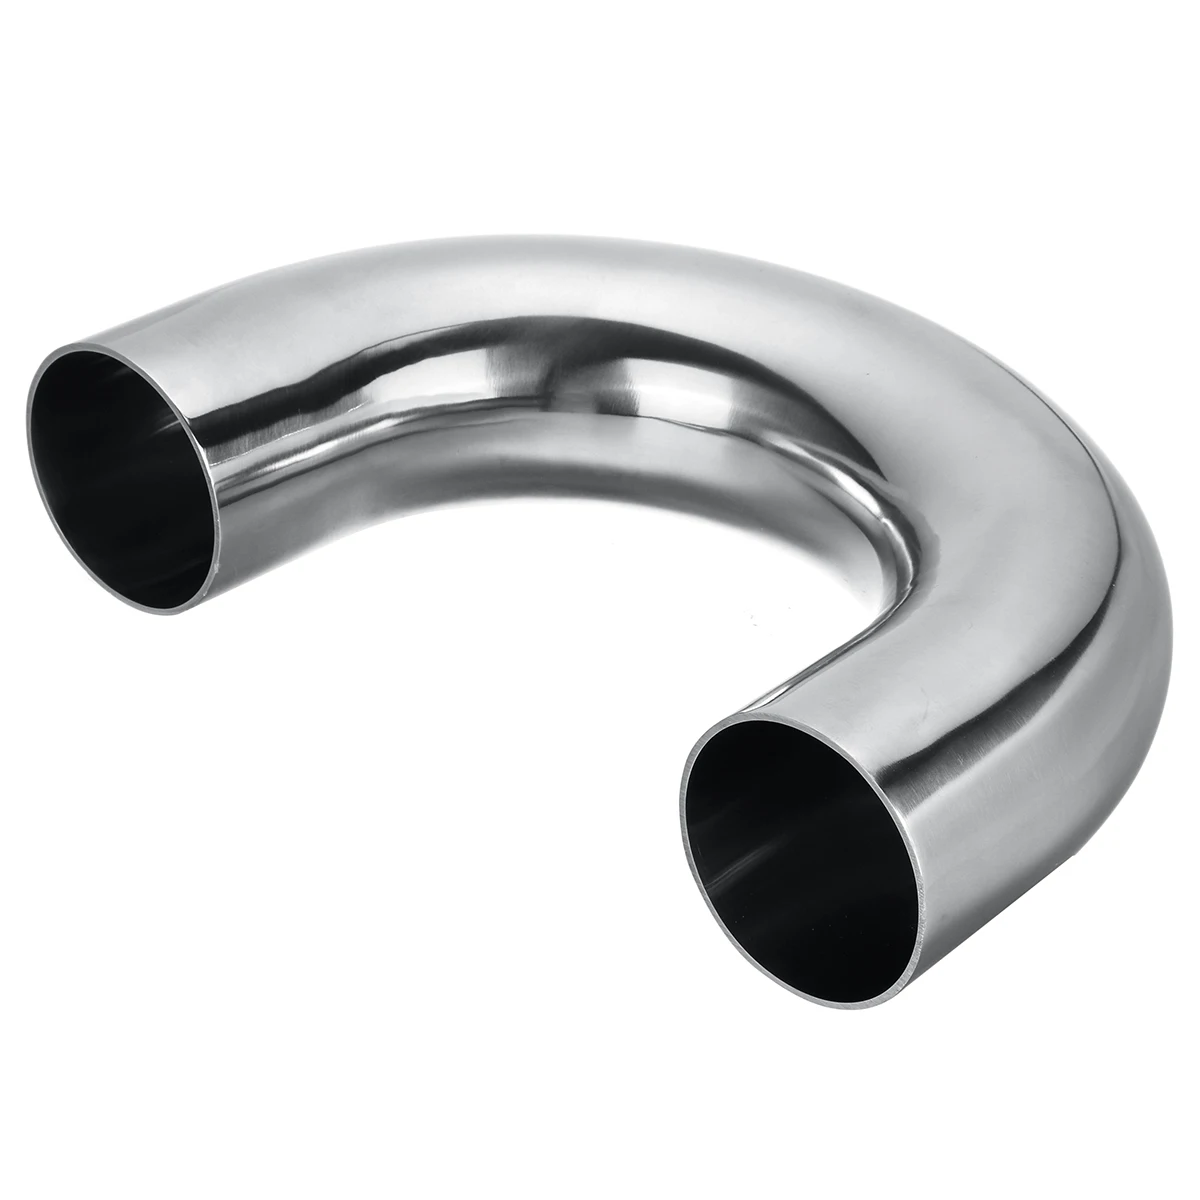 90 Degree  2.5" 63mm Elbow  Butt Weld Stainless Steel Car Exhaust Bends pipe 